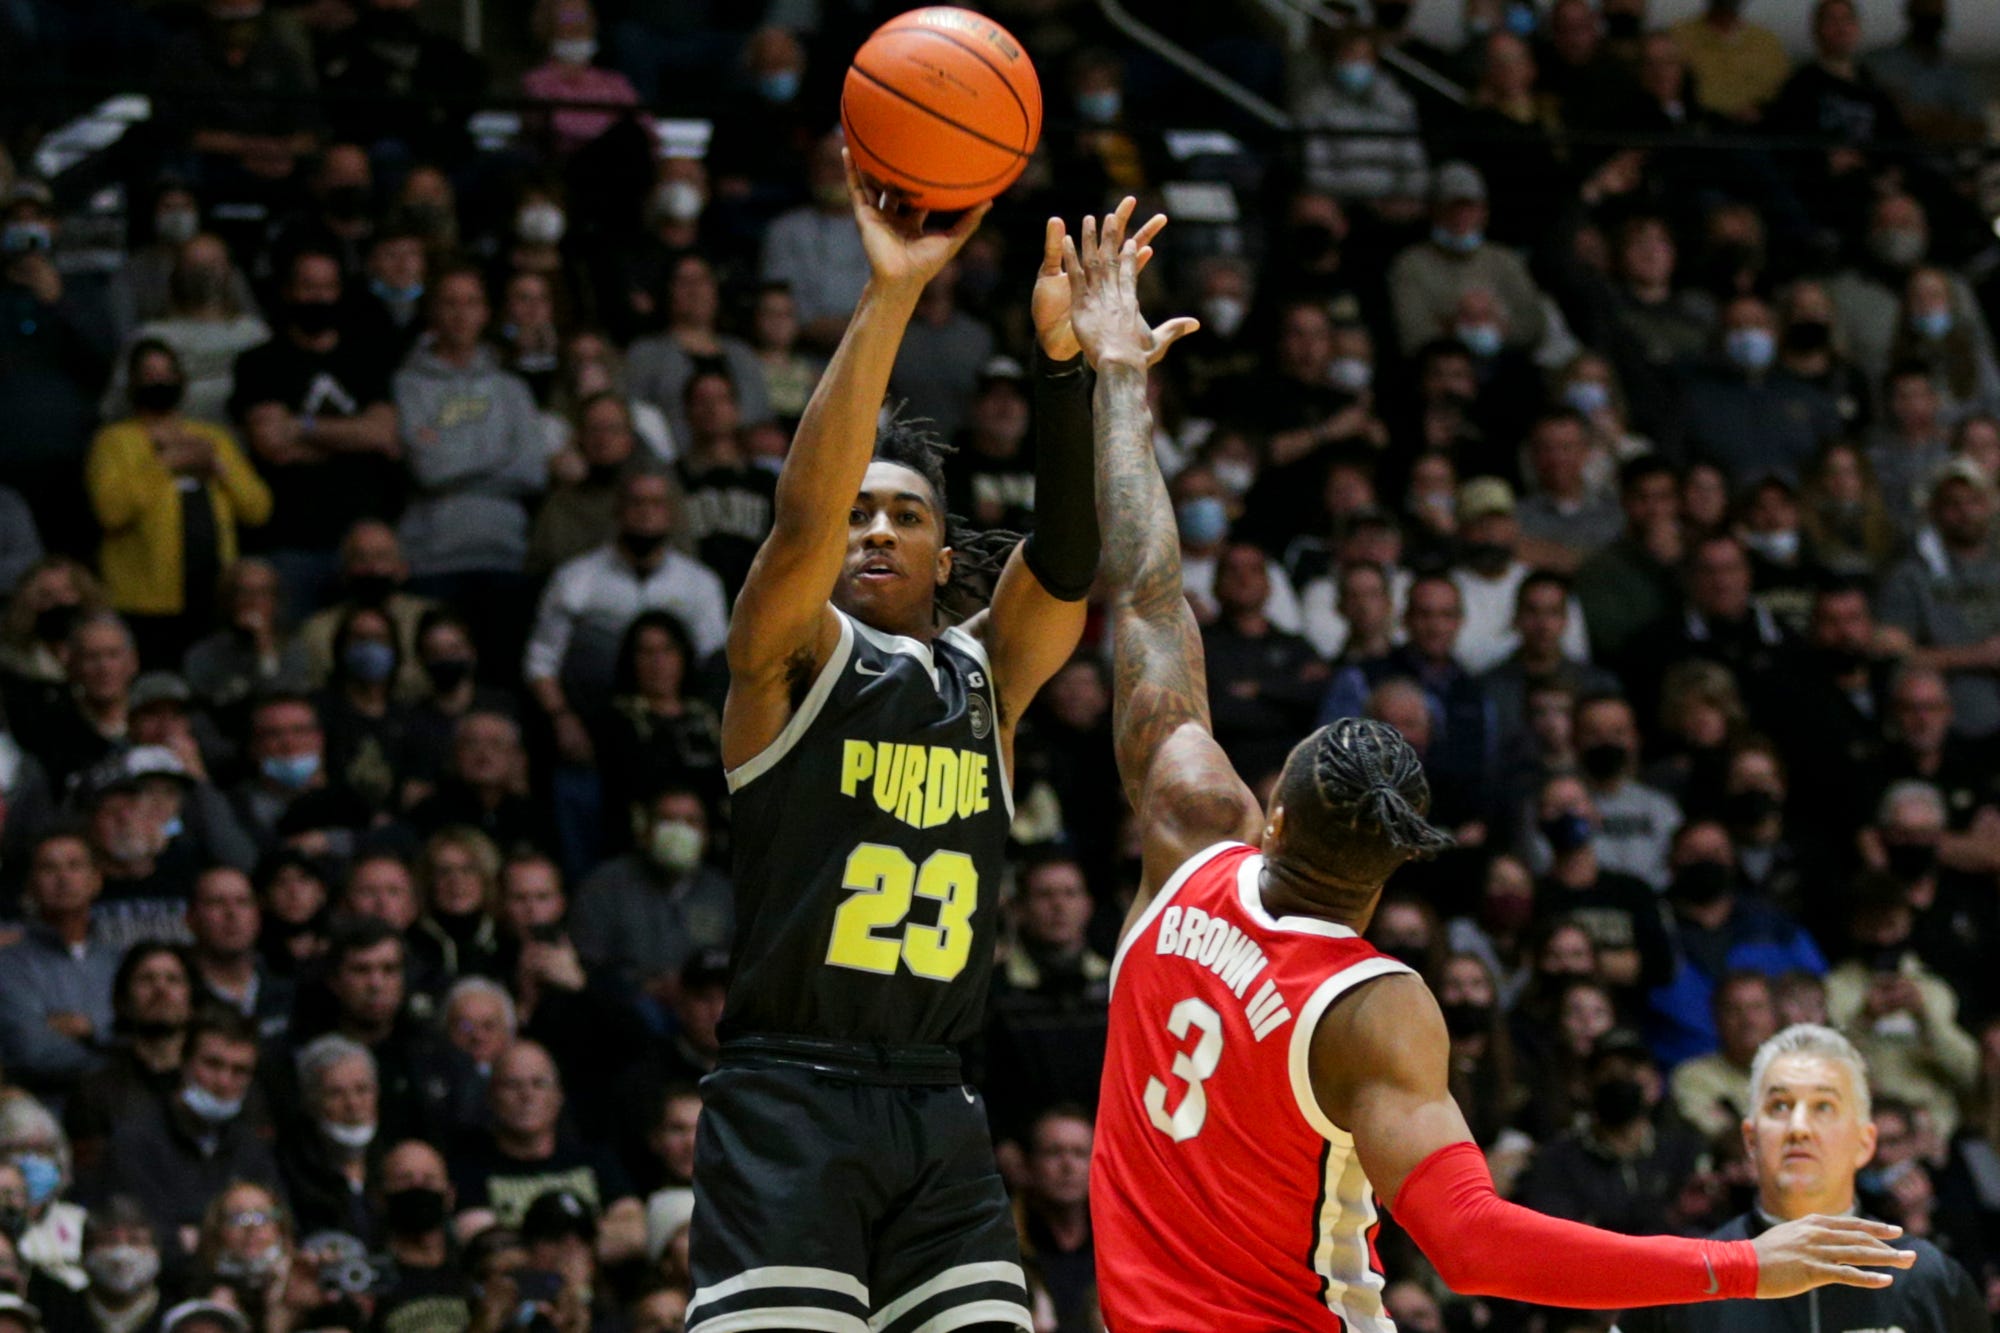 Jaden Ivey: After 2 seasons at Purdue is Ivey ready for NBA Draft?